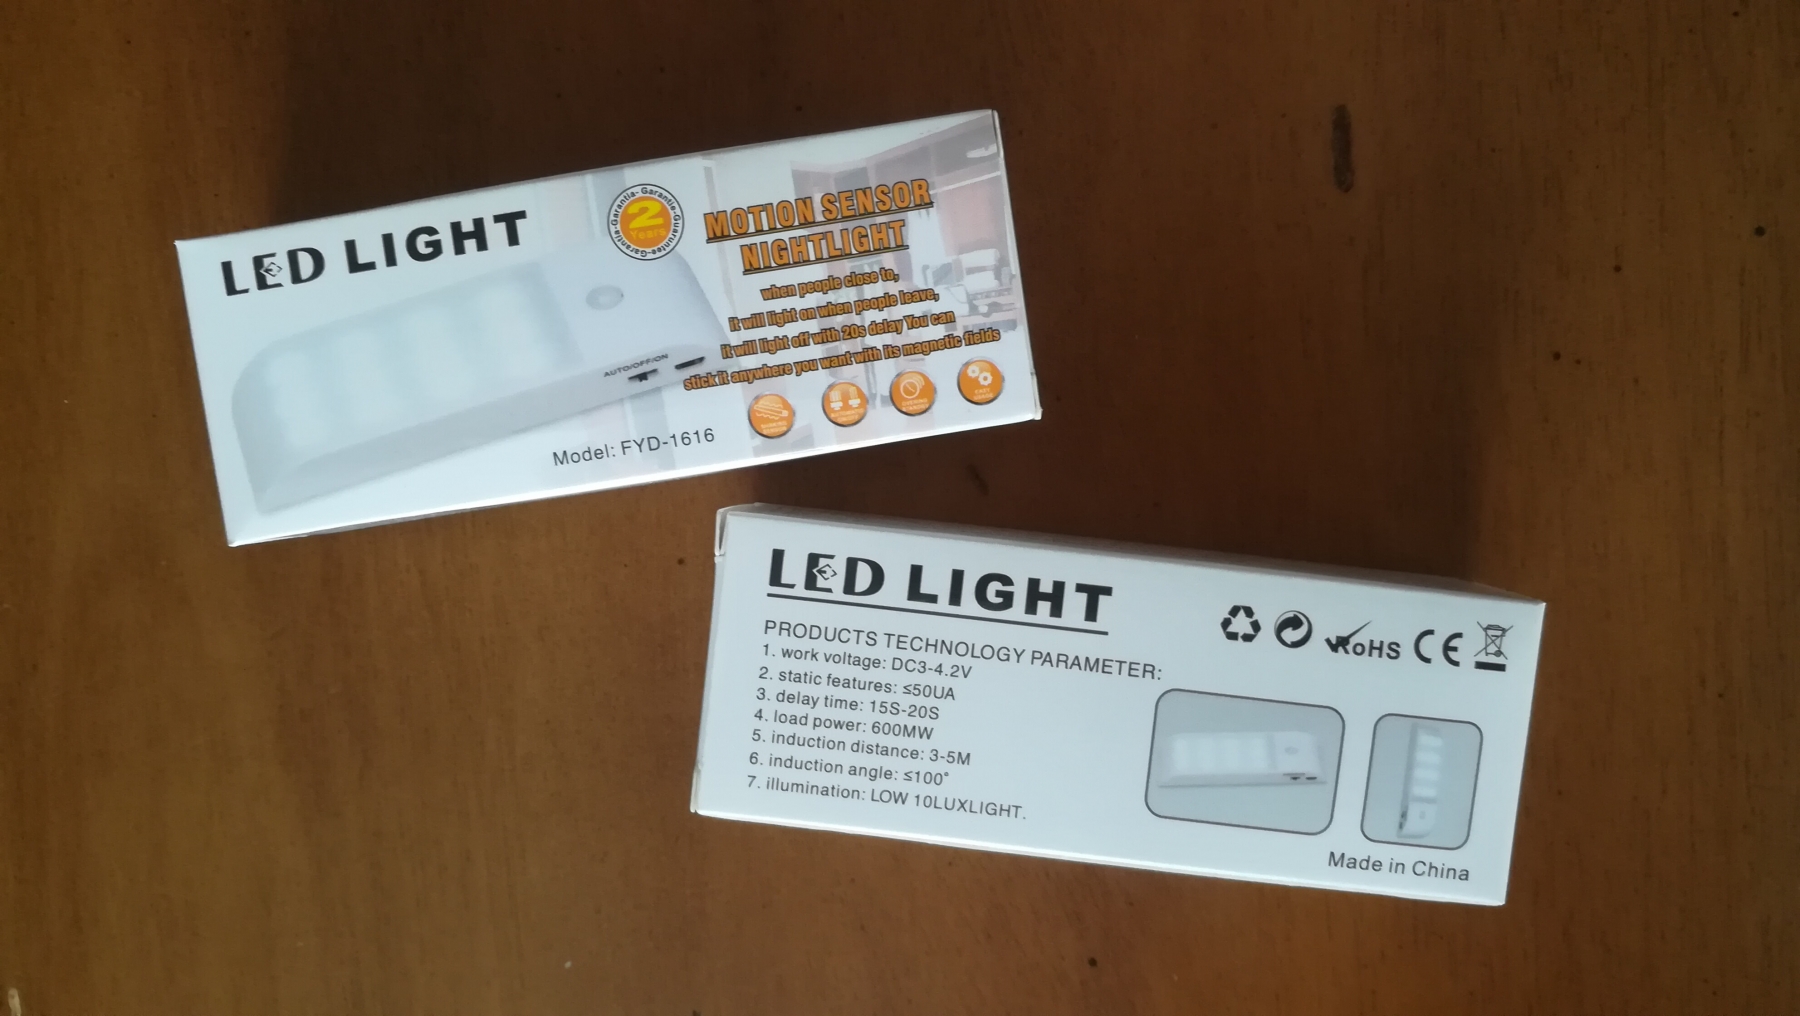 Been wanting some motion sensing night lights!